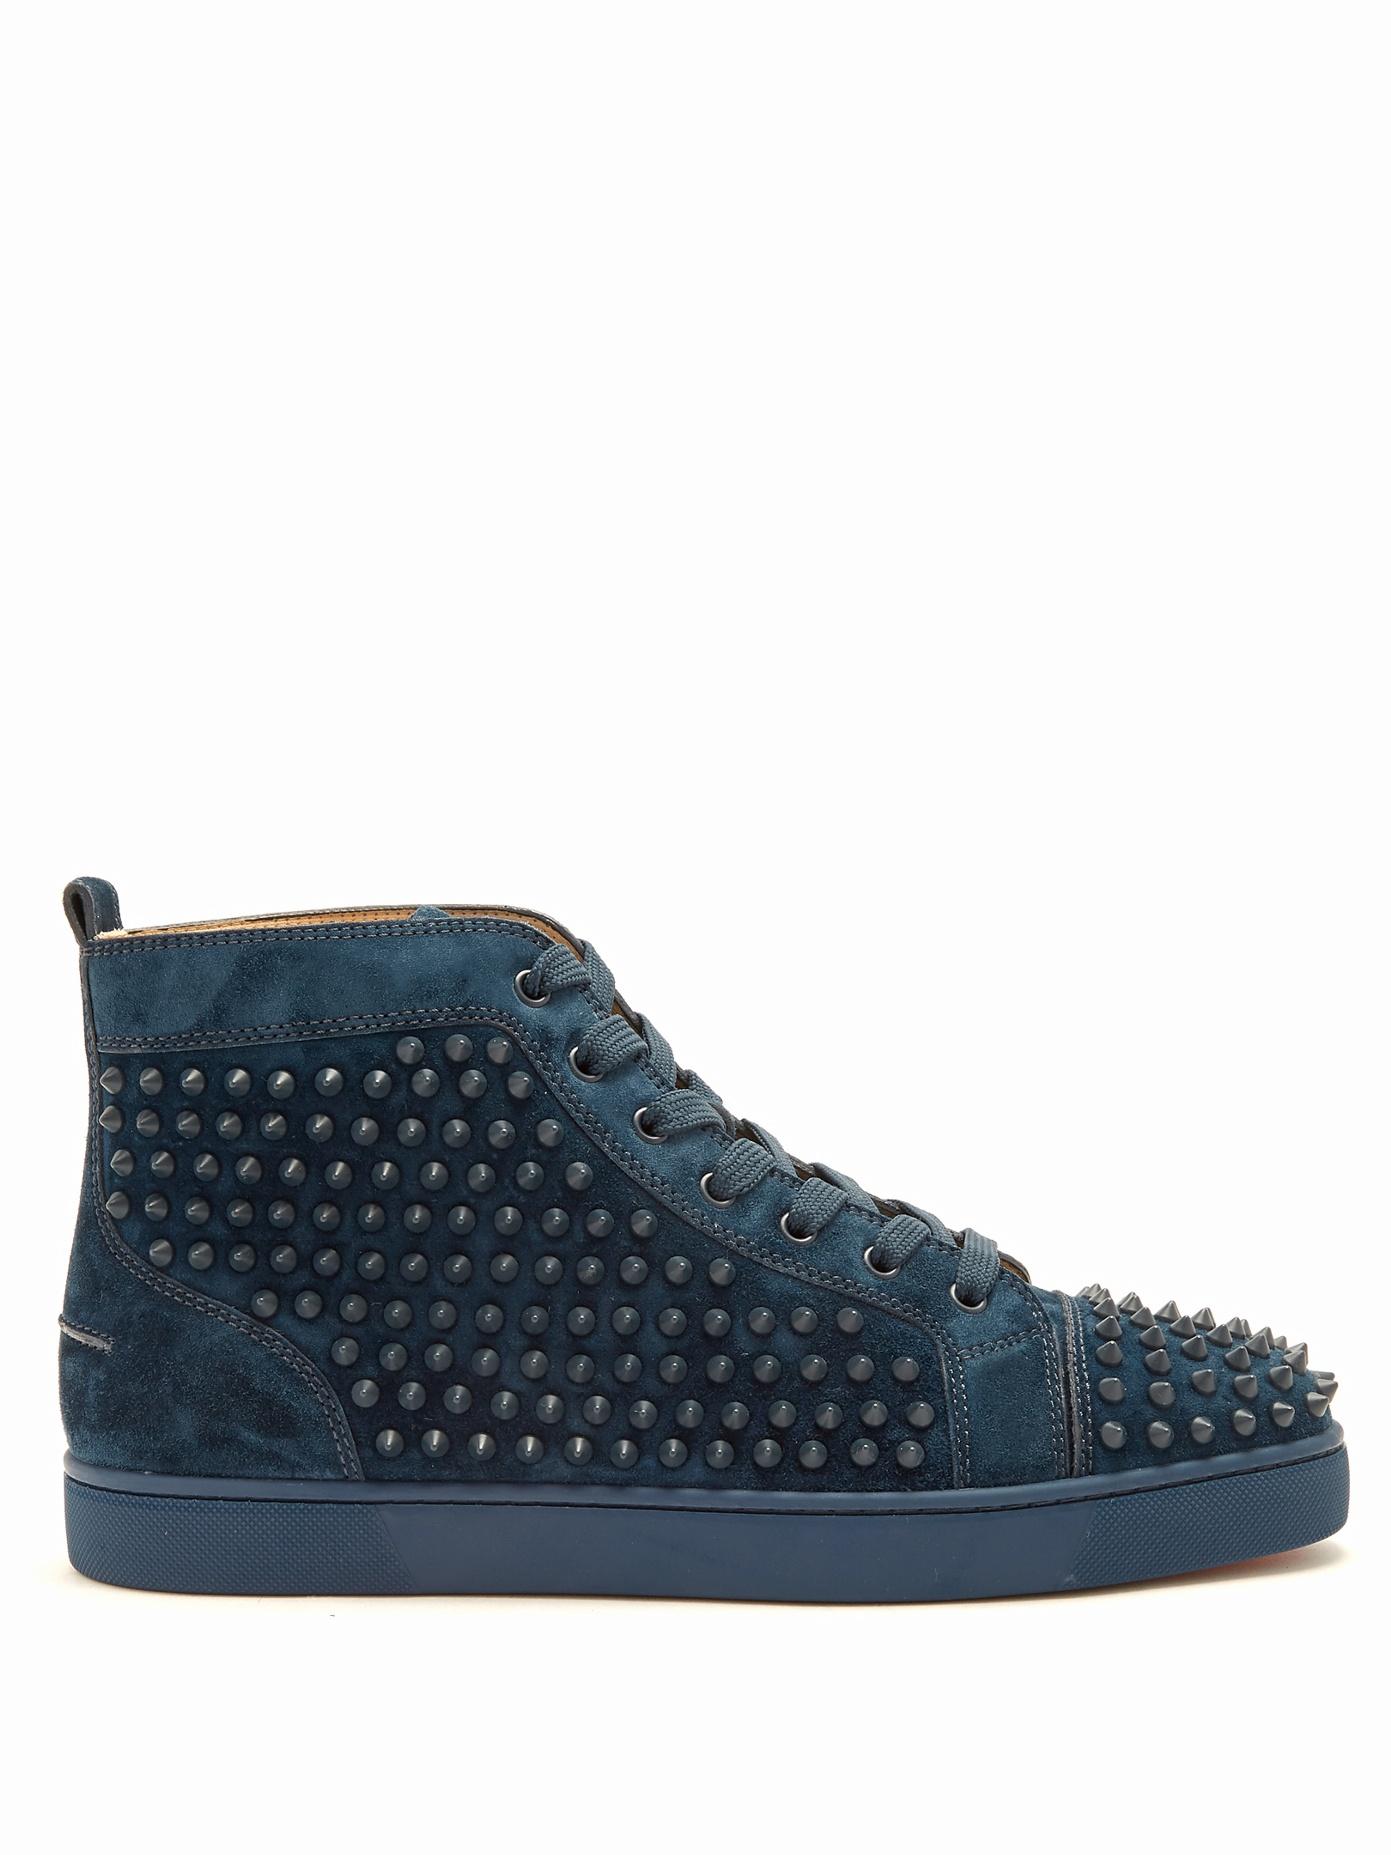 Christian Louboutin Louis High-top Spike-embellished Trainers In Navy ...